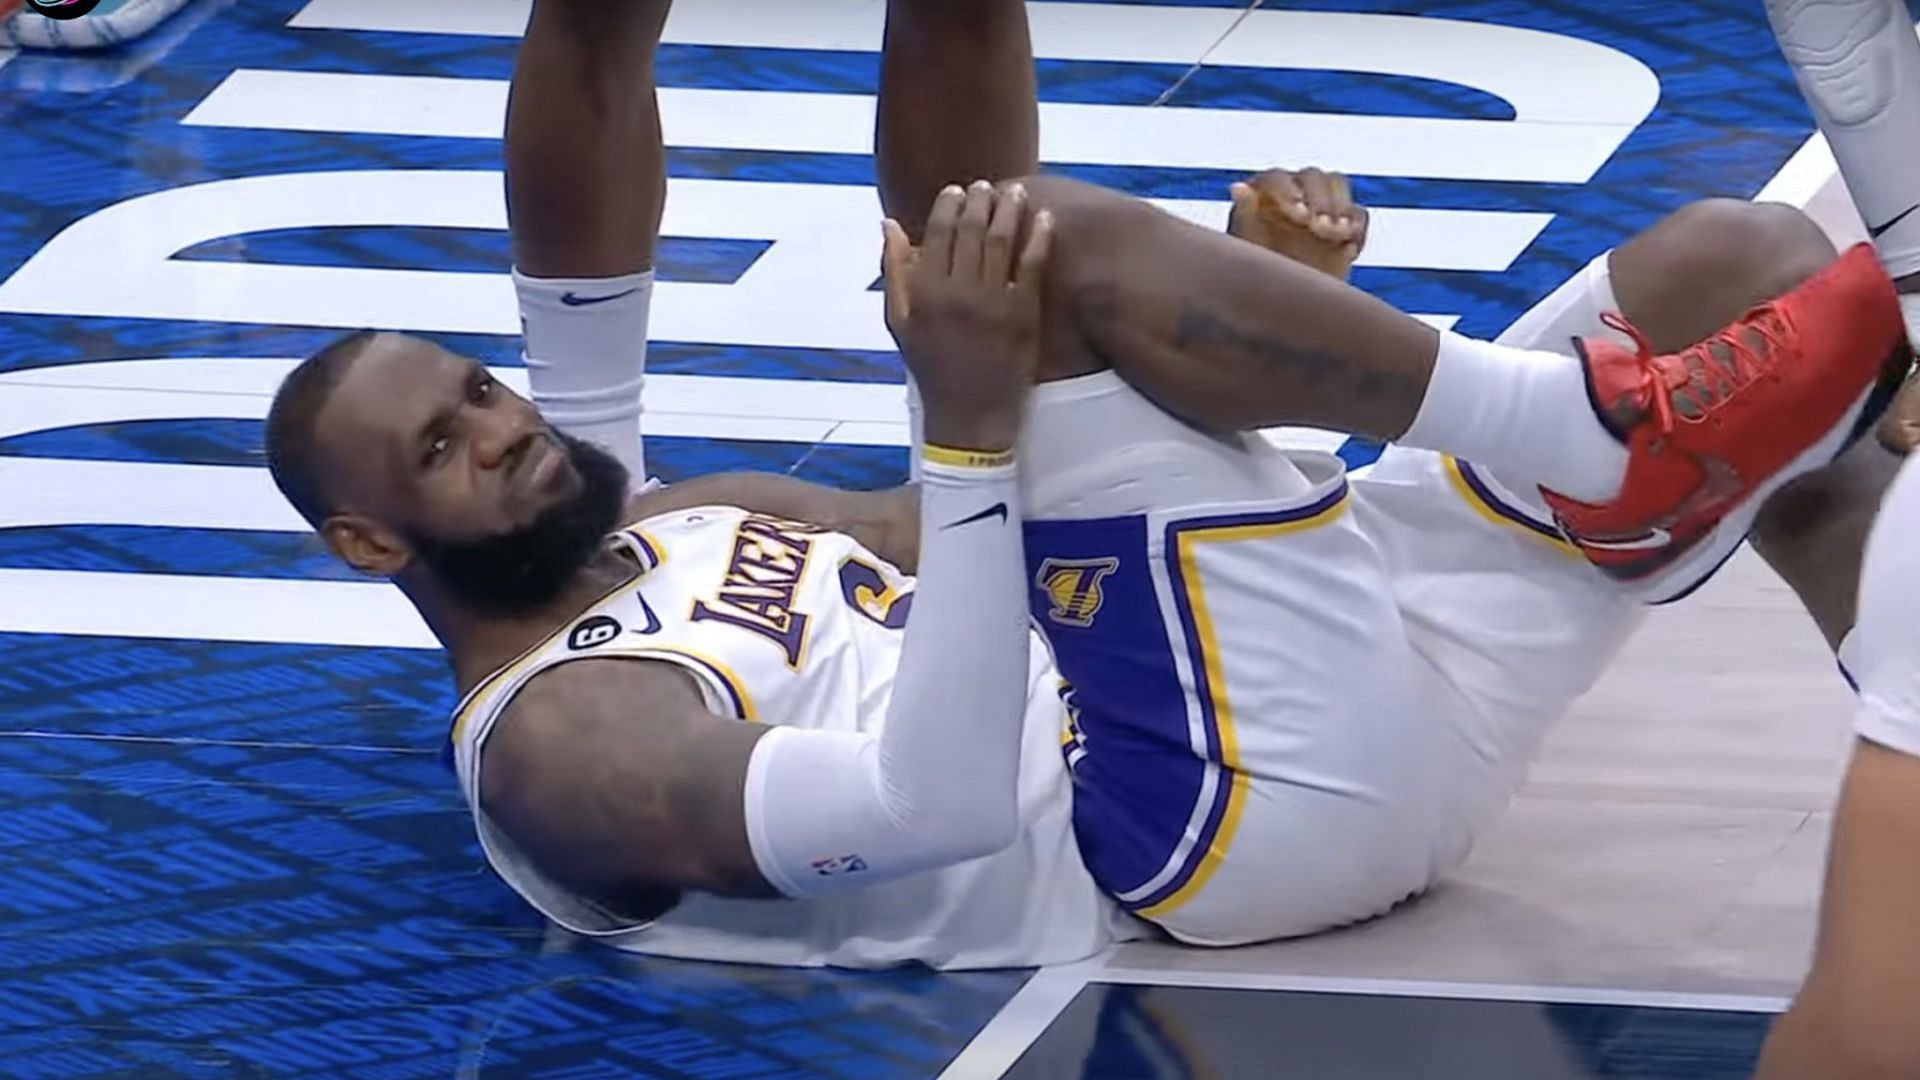 LA Lakers star forward LeBron James grimacing in pain following an apparent right foot injury on Sunday versus Dallas